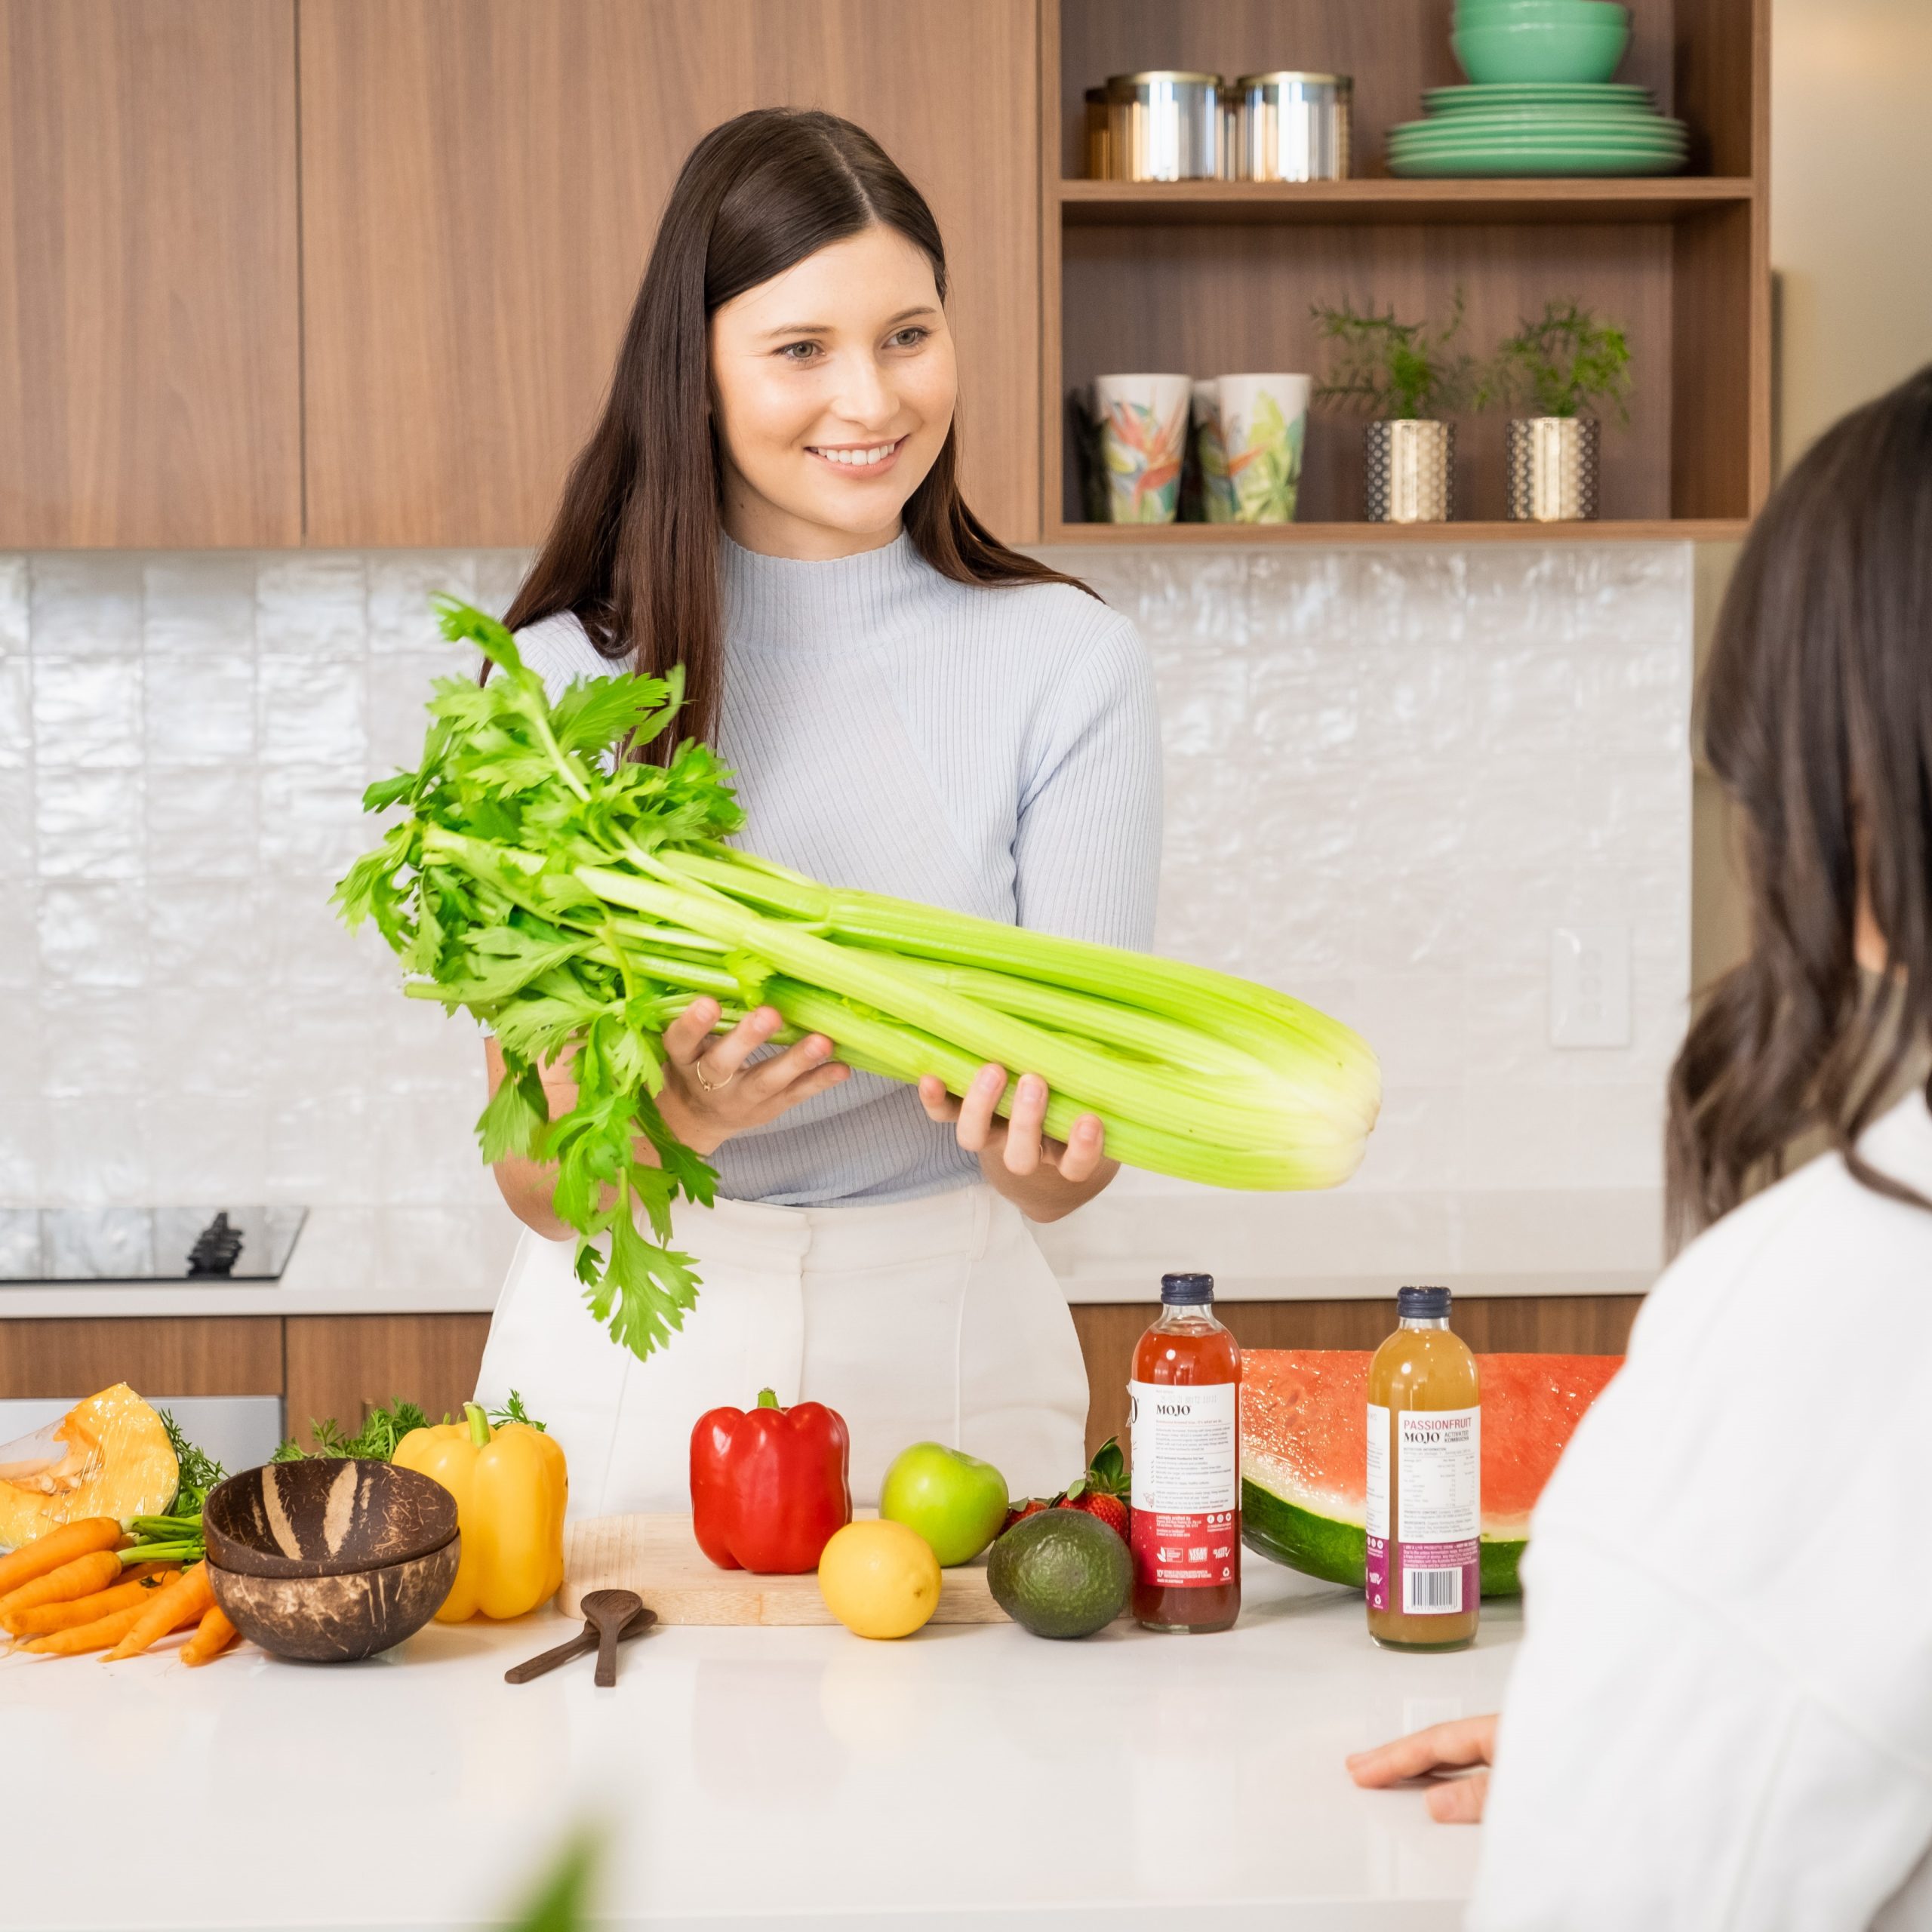 Dietitian standing in a kitchen with mixed fruit and vegetable holding celery